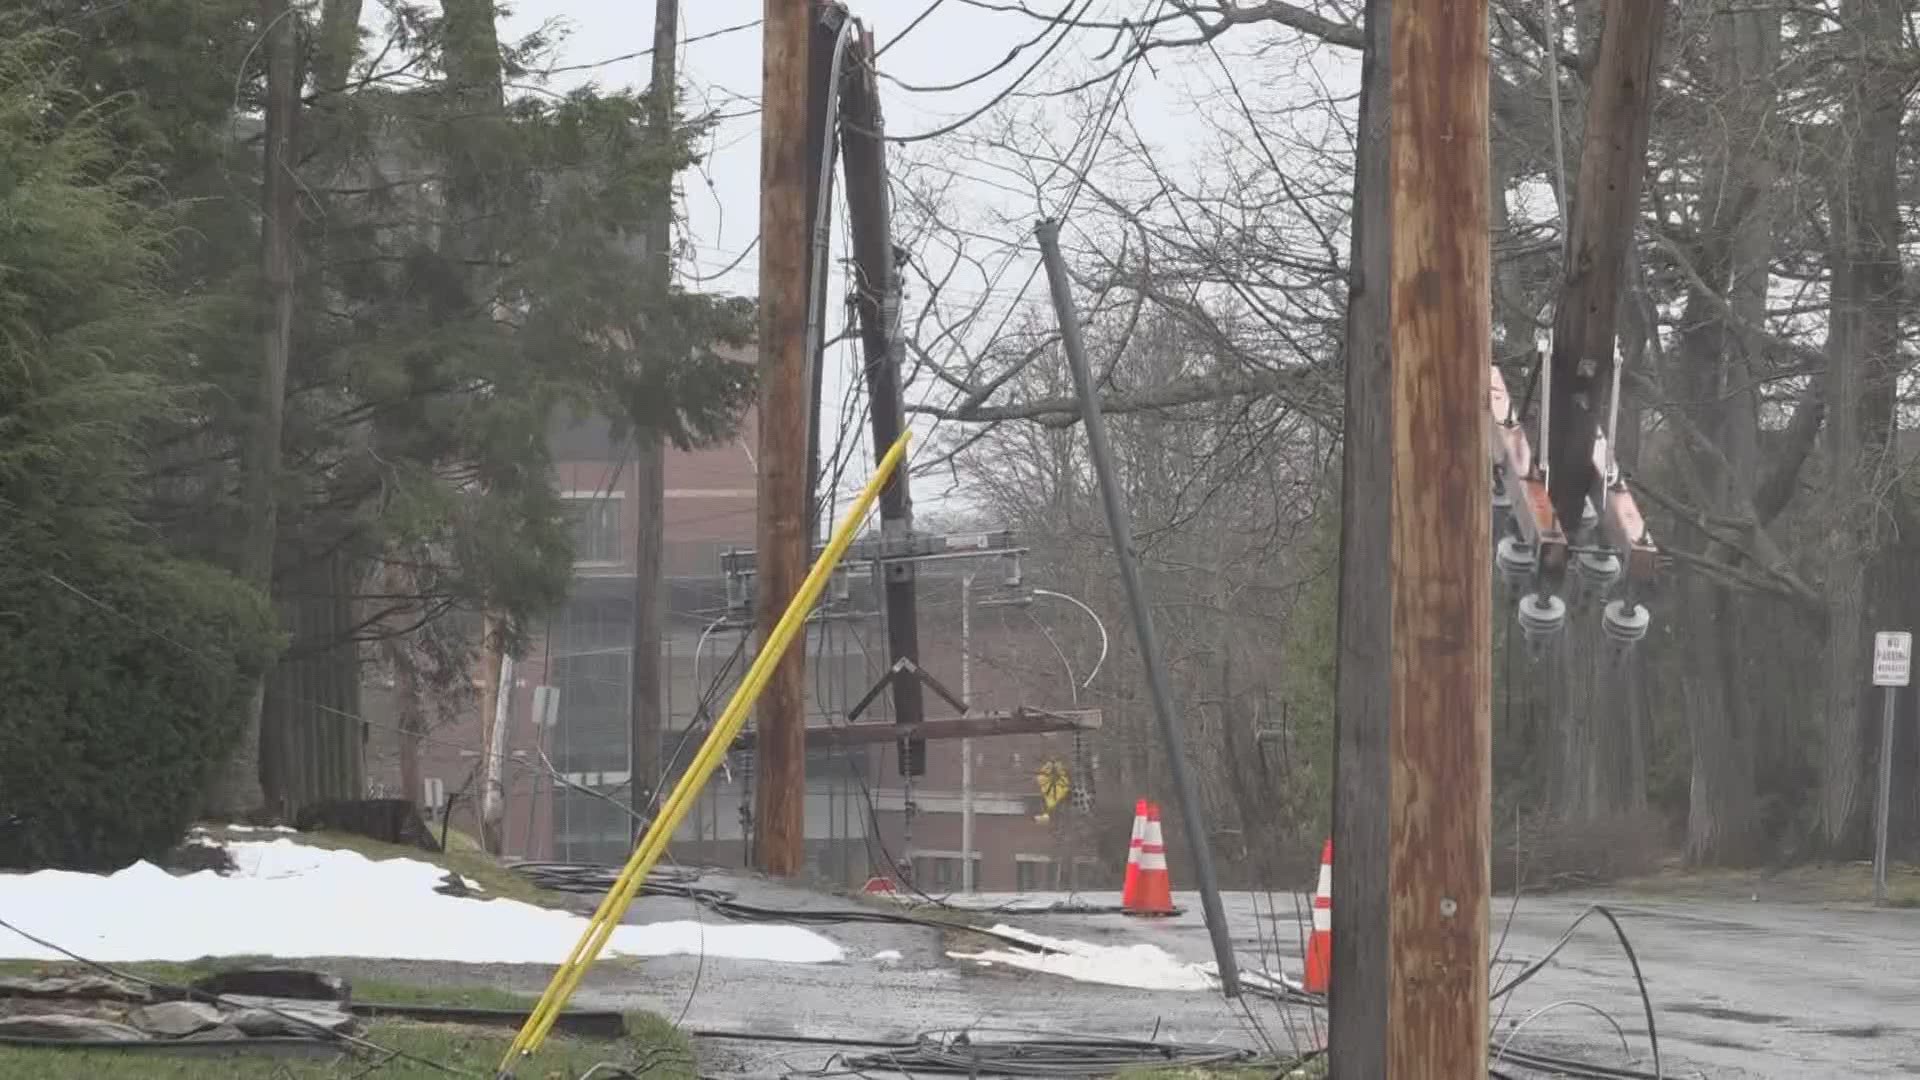 Wind storm couldn't come at a worst time for power companies amid coronavirus and snowstorm clean-up efforts